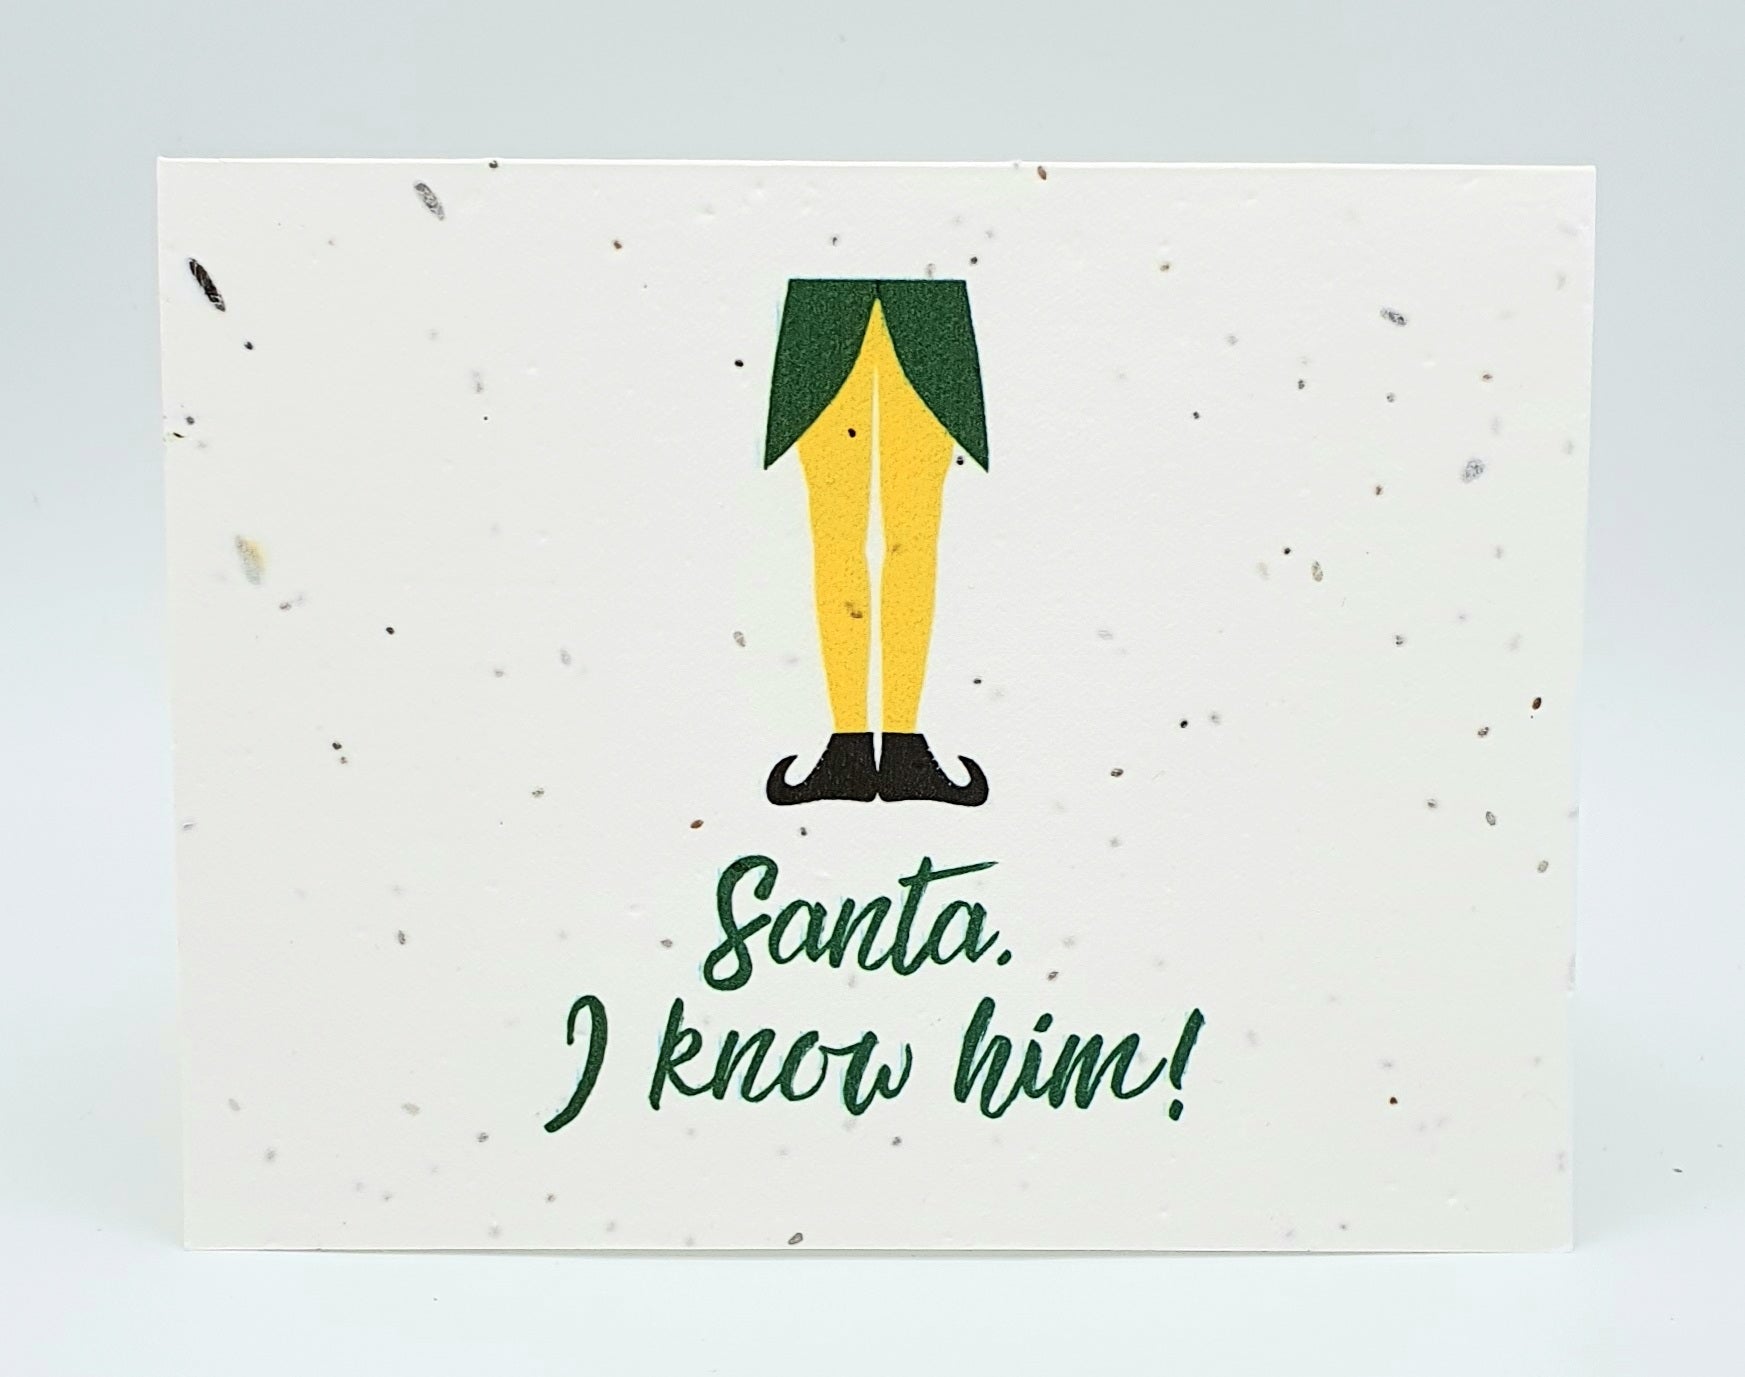 Plantable seed paper card with Elf legs and Santa, I know him!